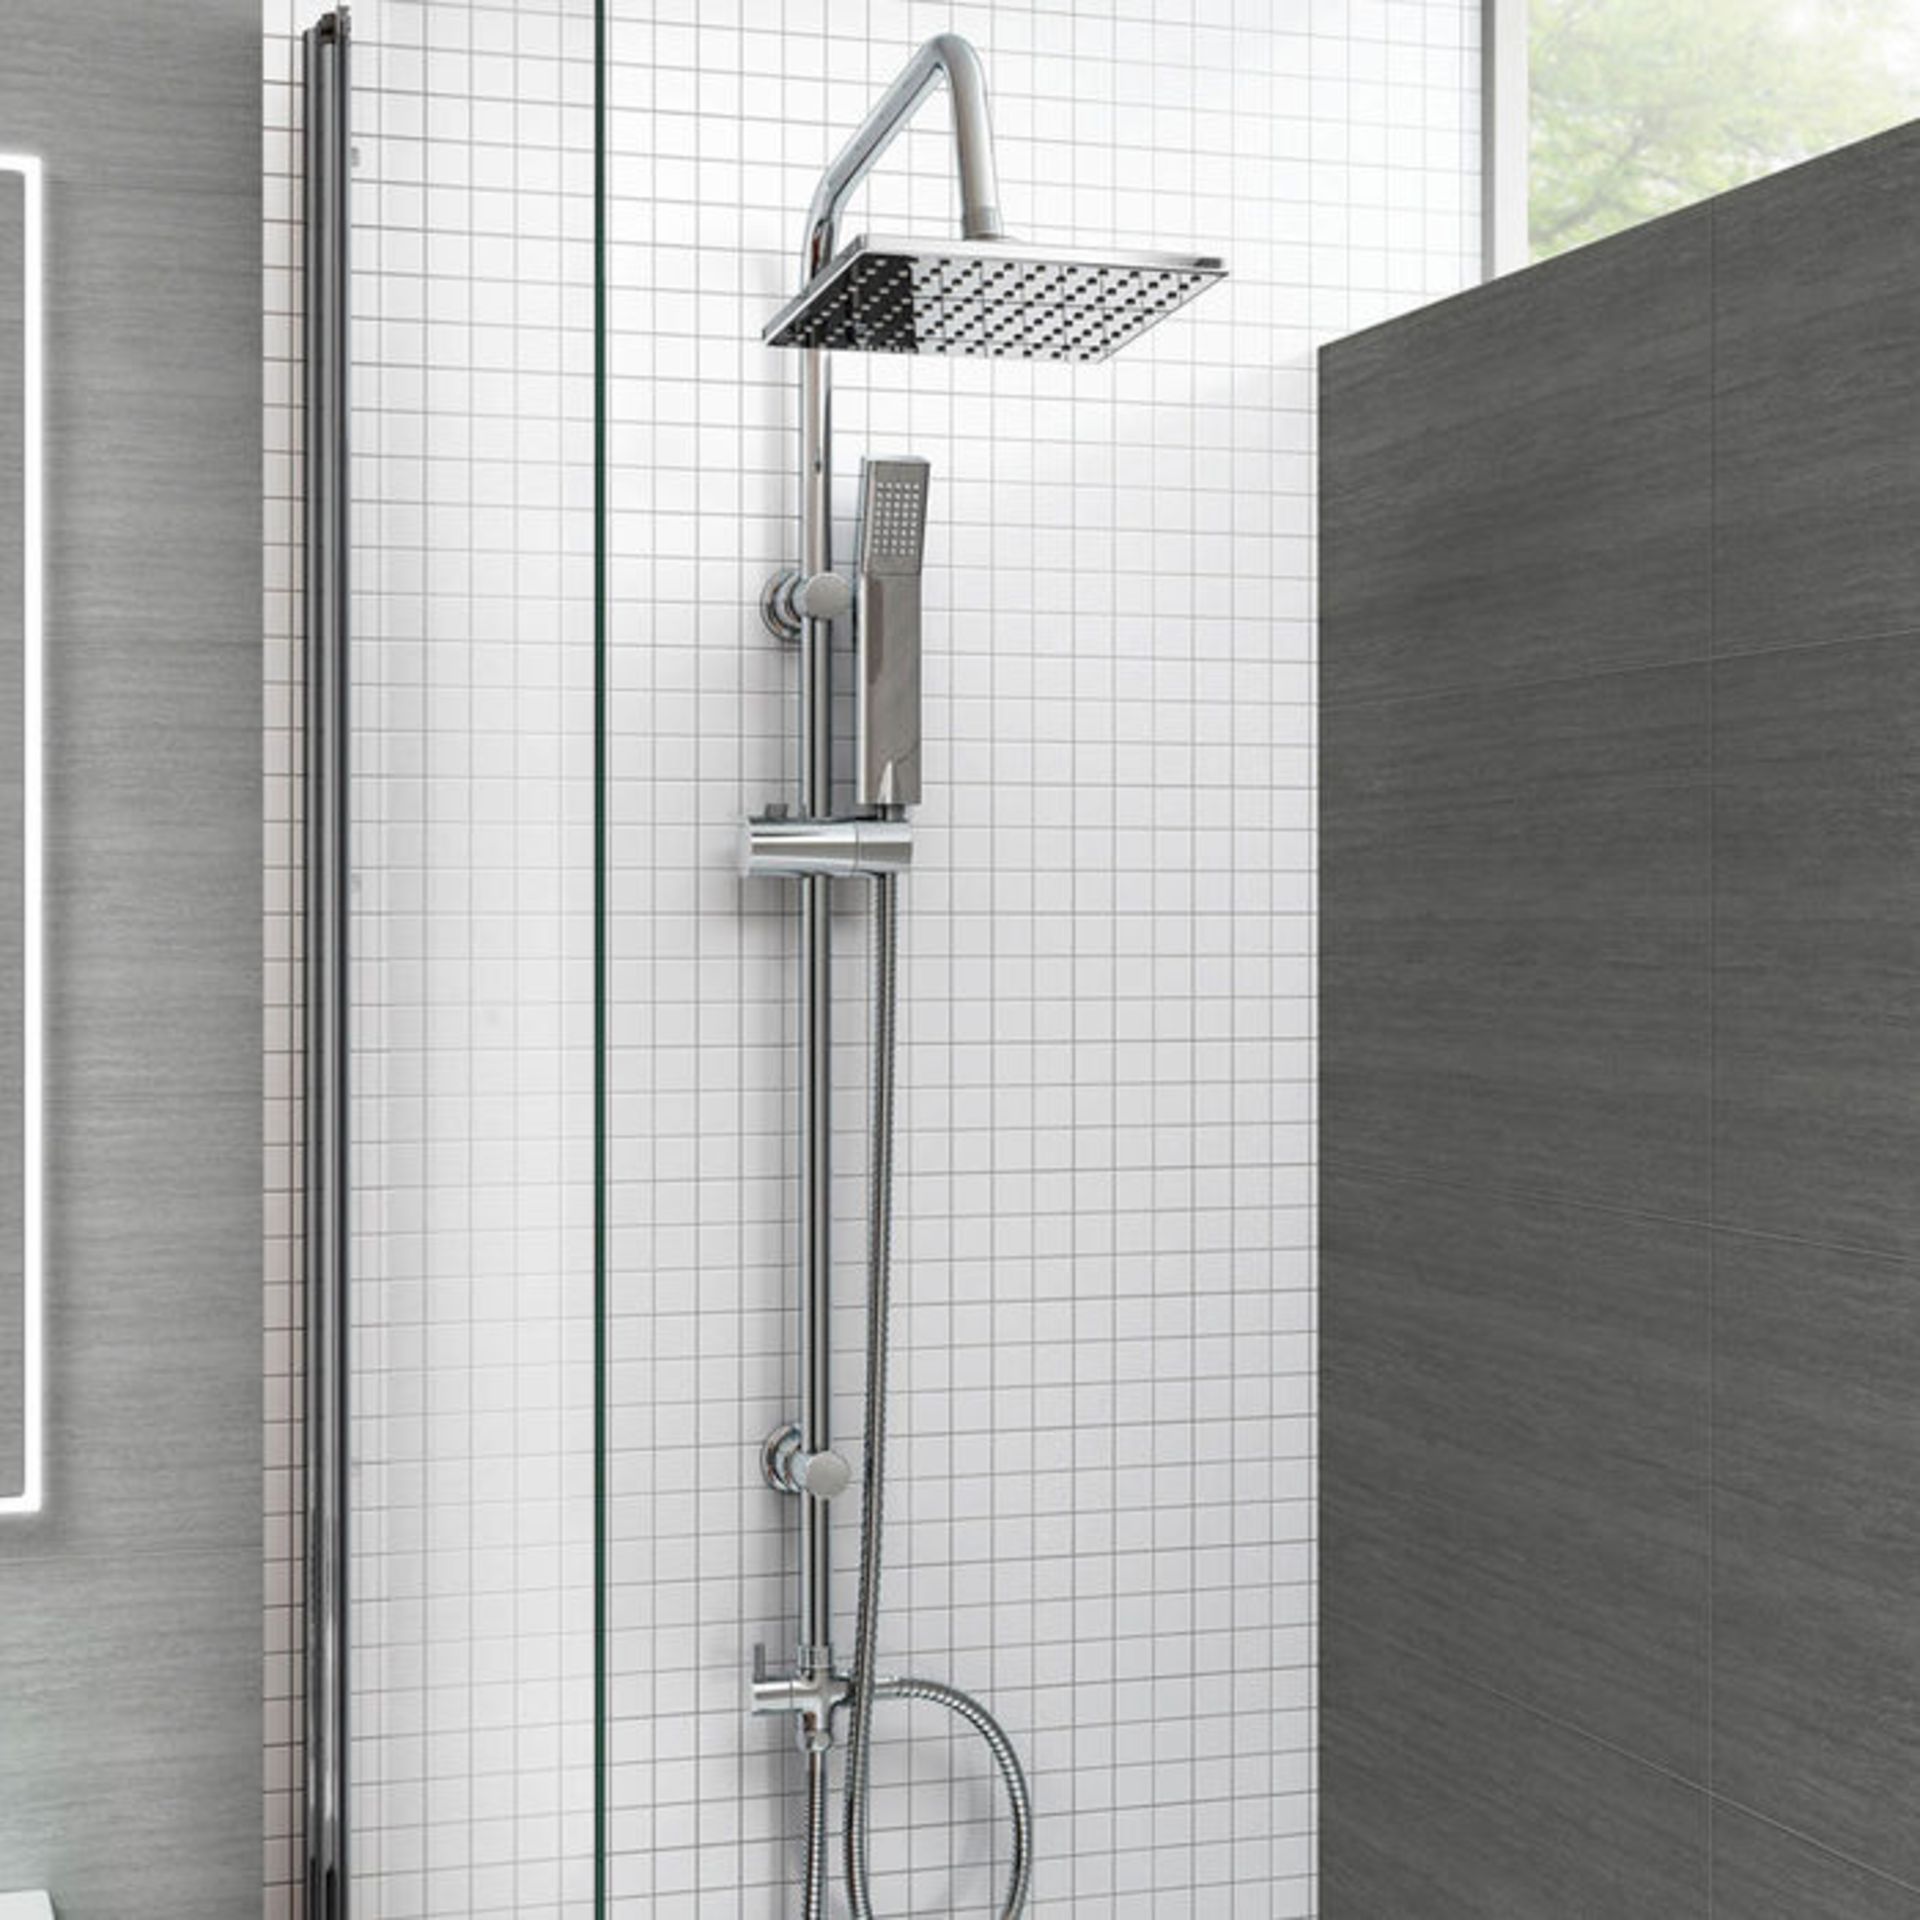 (P160) 200mm Square Head, Riser Rail & Handheld Kit. Quality stainless steel shower head with Easy